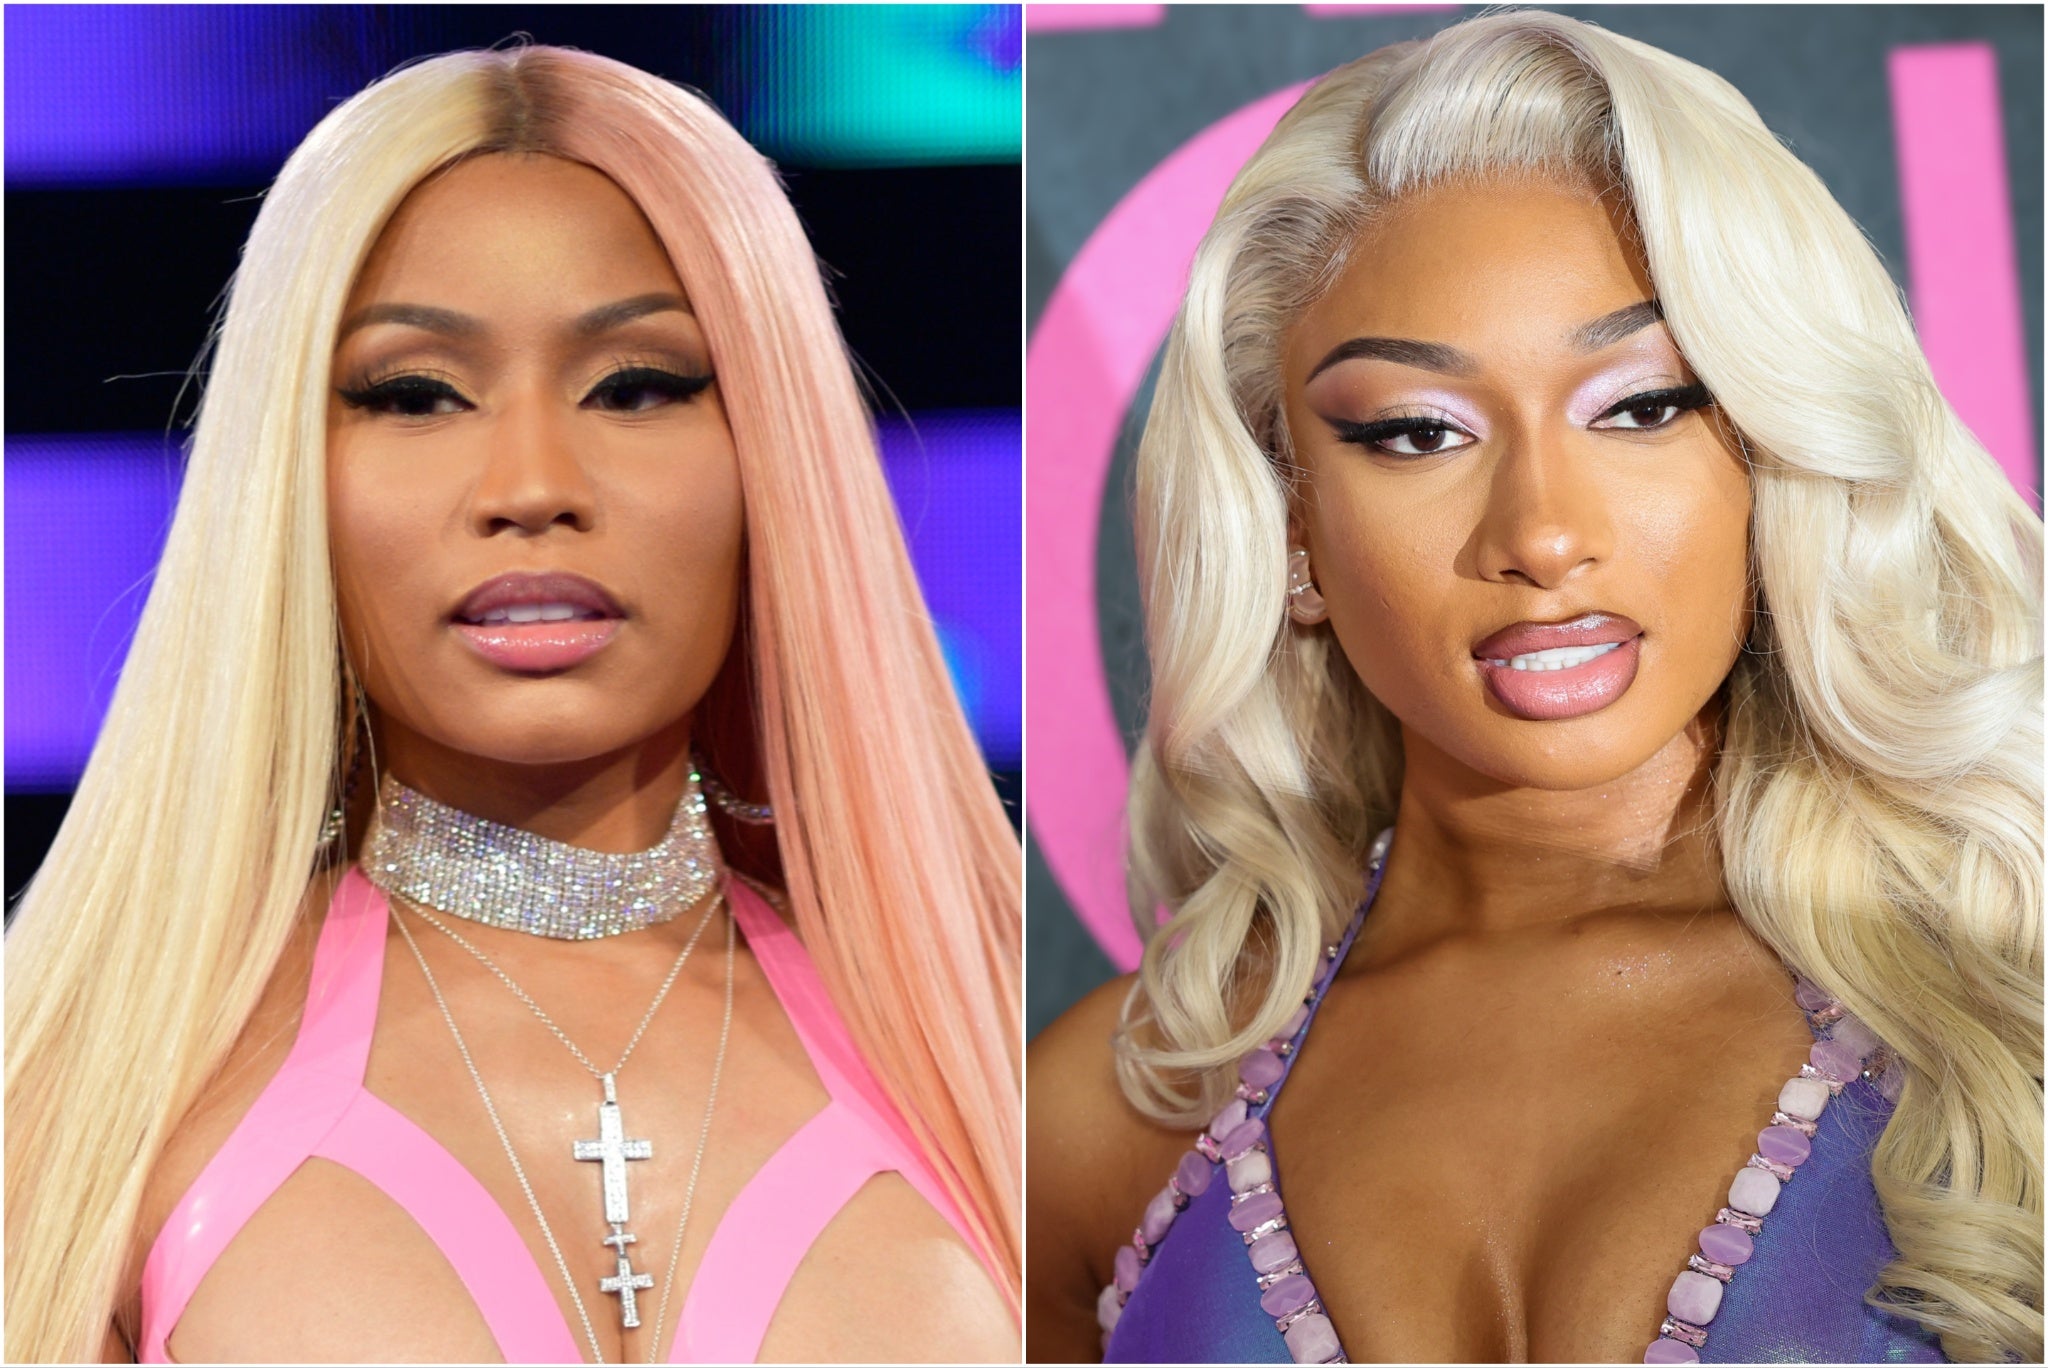 Nicki Minaj (left) and Megan Thee Stallion are locked in a feud that has grown over the past few years